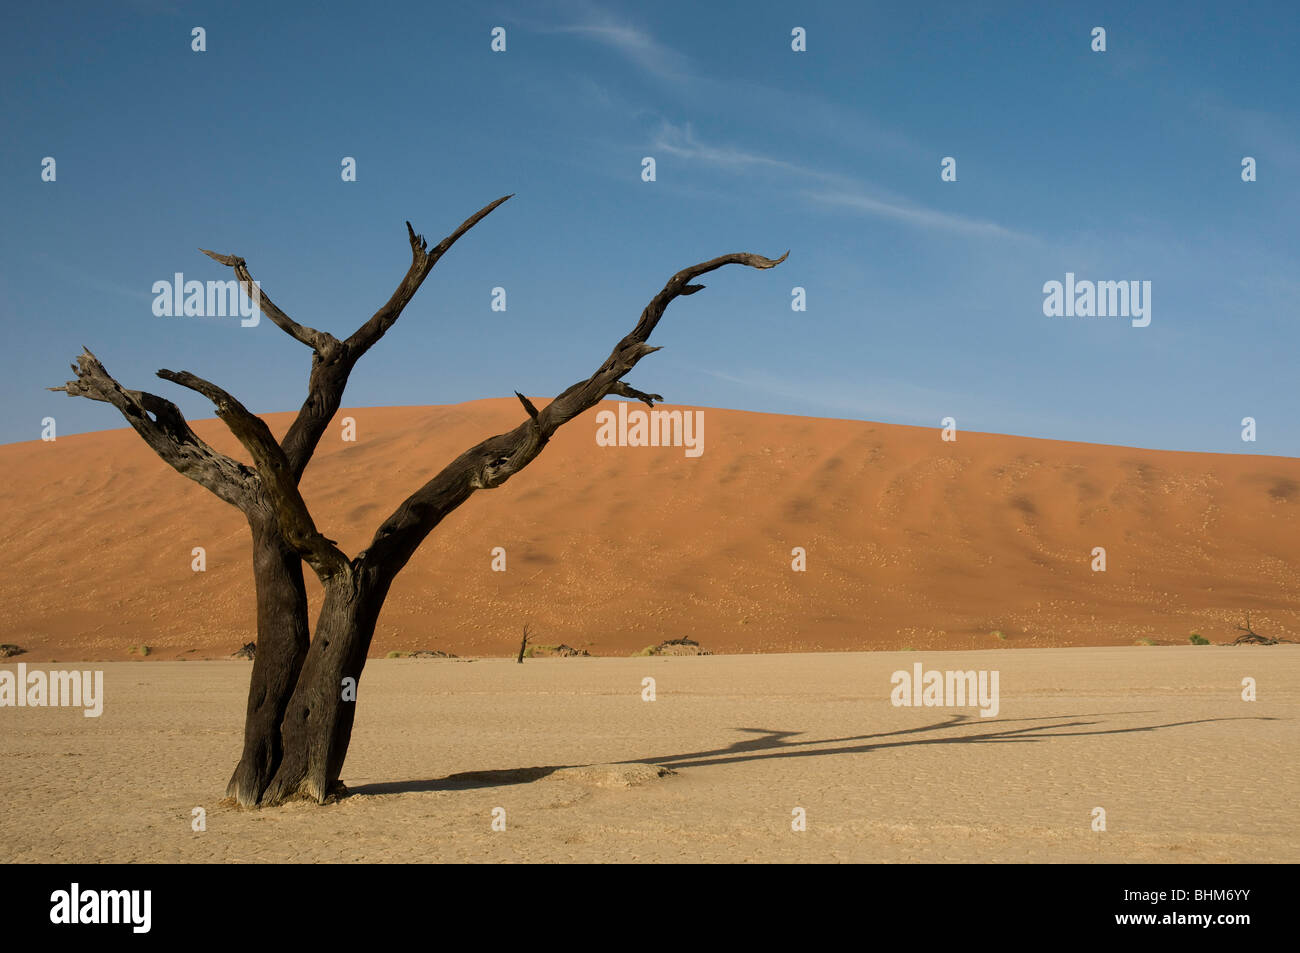 Dead trees in dry mud pan, DeadVlei, Sesriem, Namibia desert. Red dunes. Drought ground patterns. Stock Photo